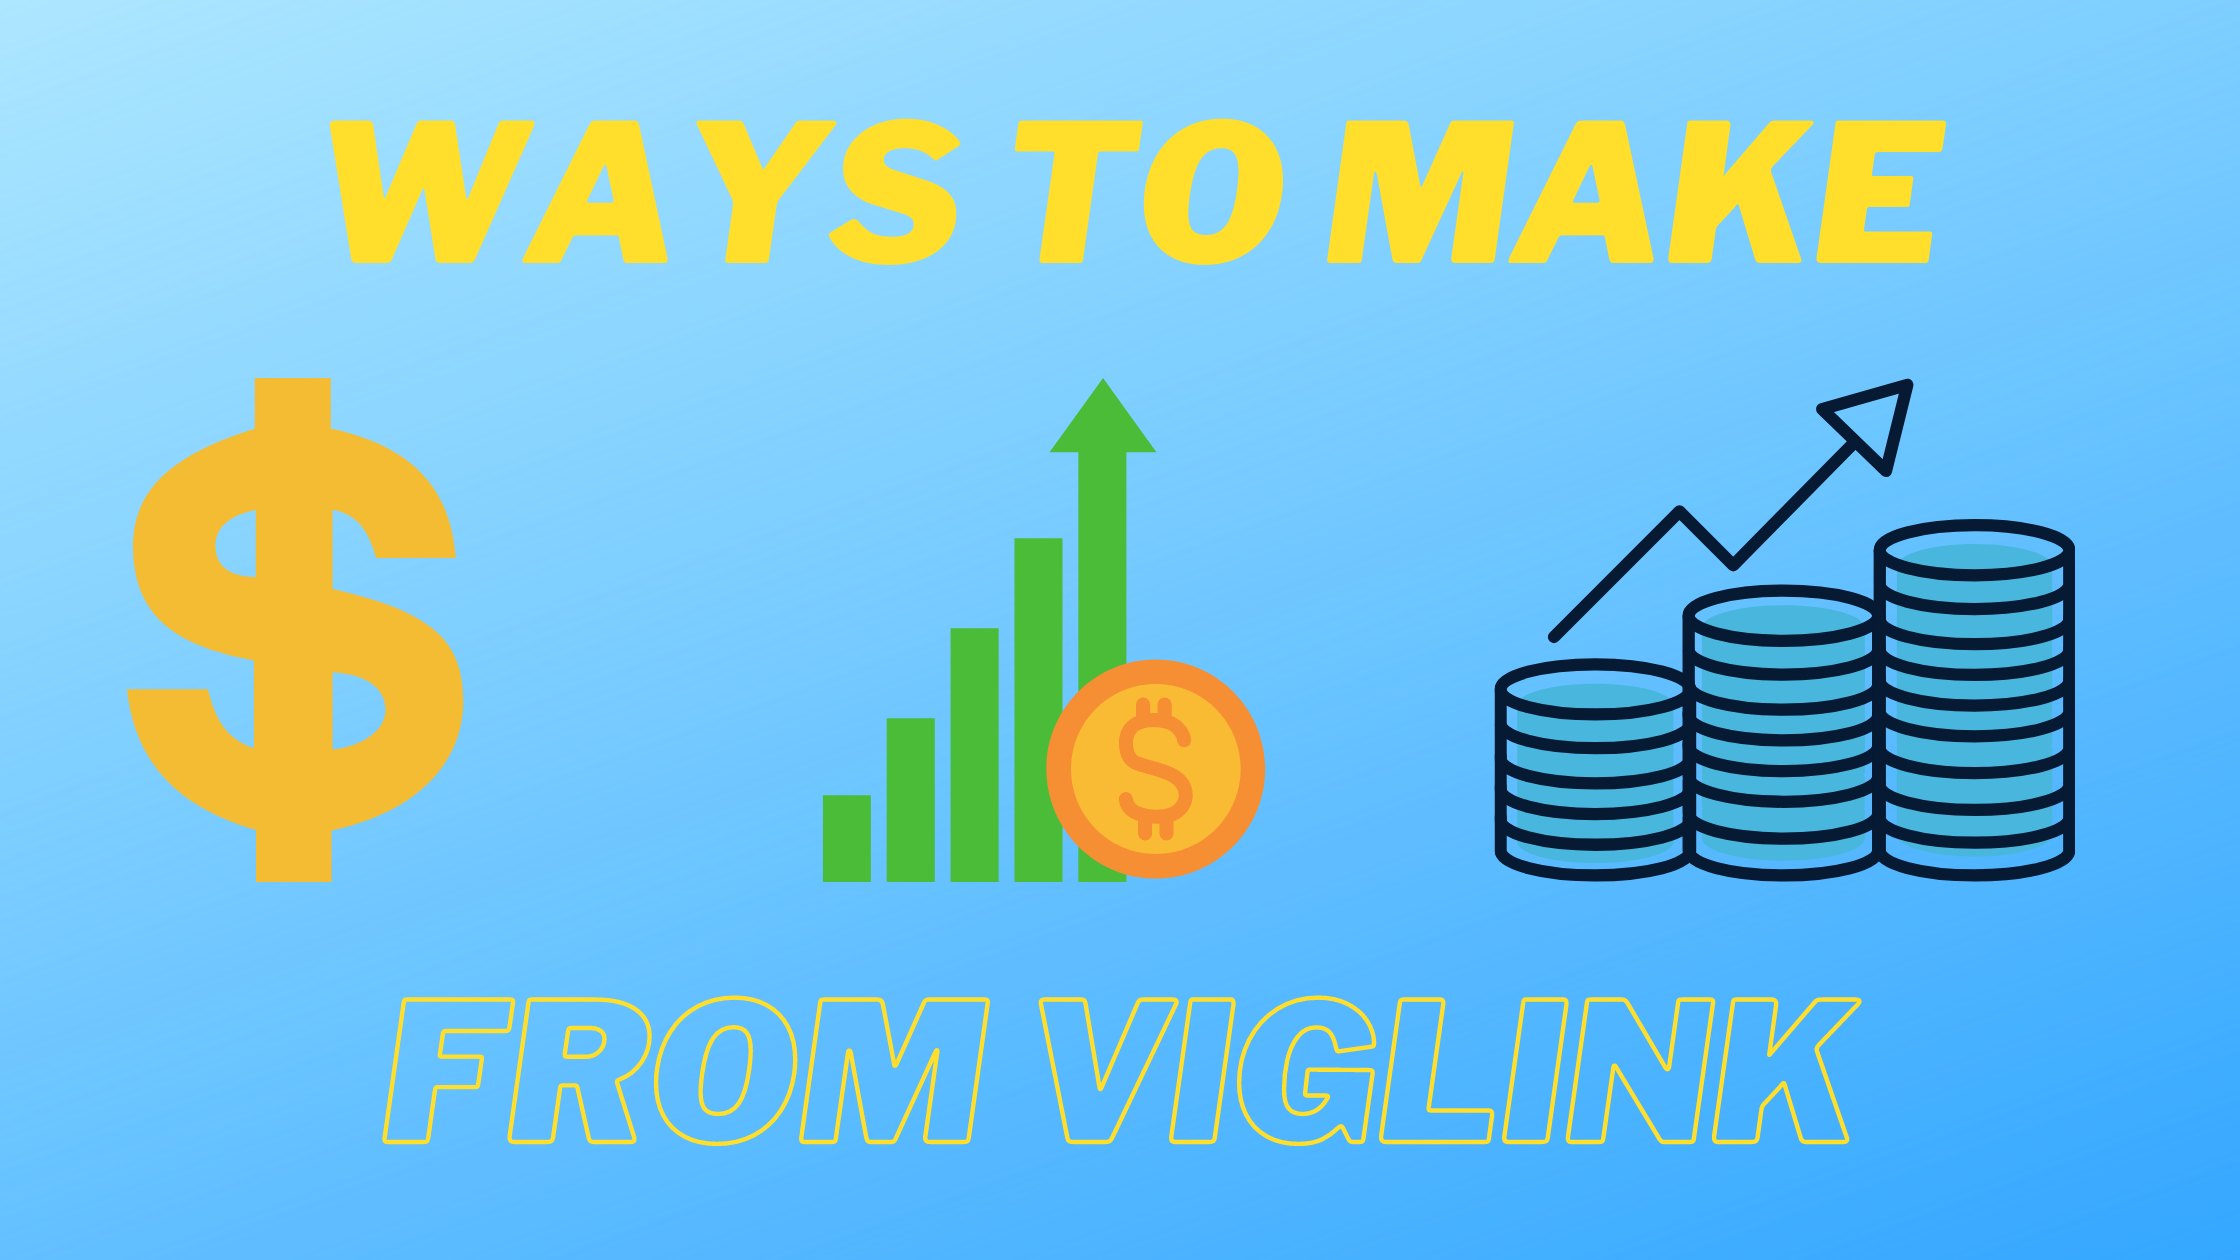 Check Out How You Can Make More Money With VigLink!!